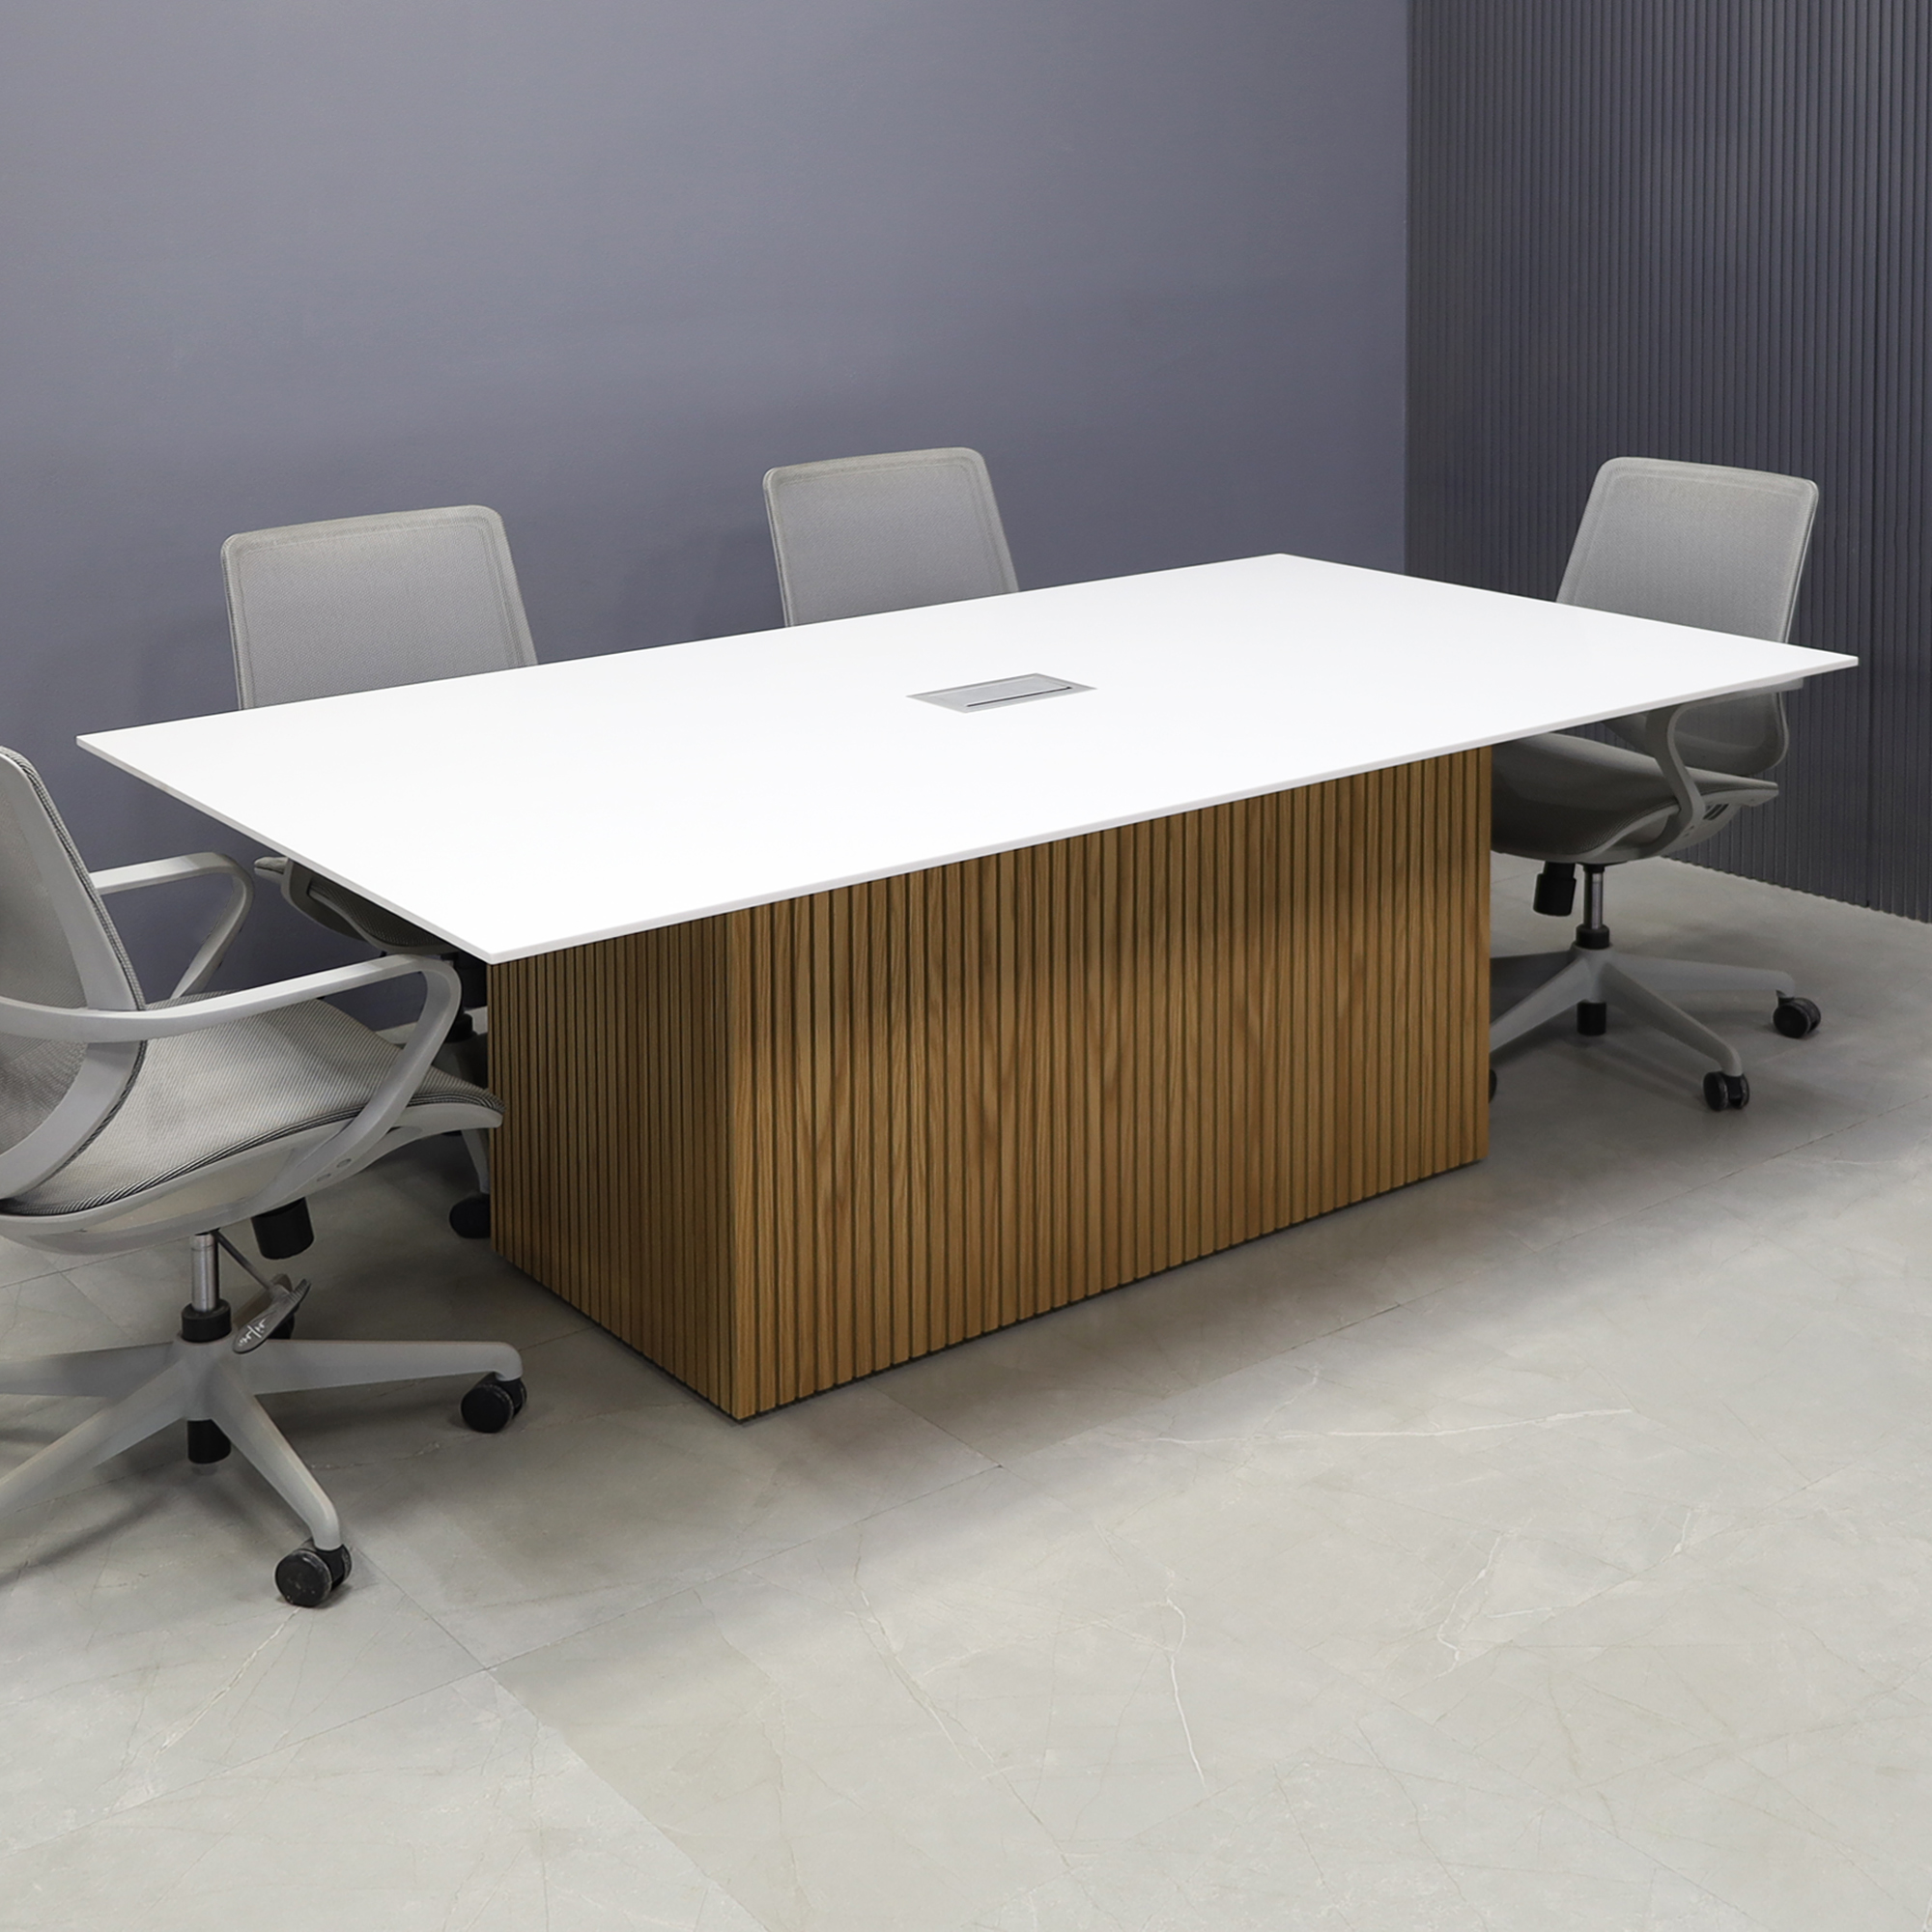 78-inch Aurora Rectangular Conference Table in 1/2